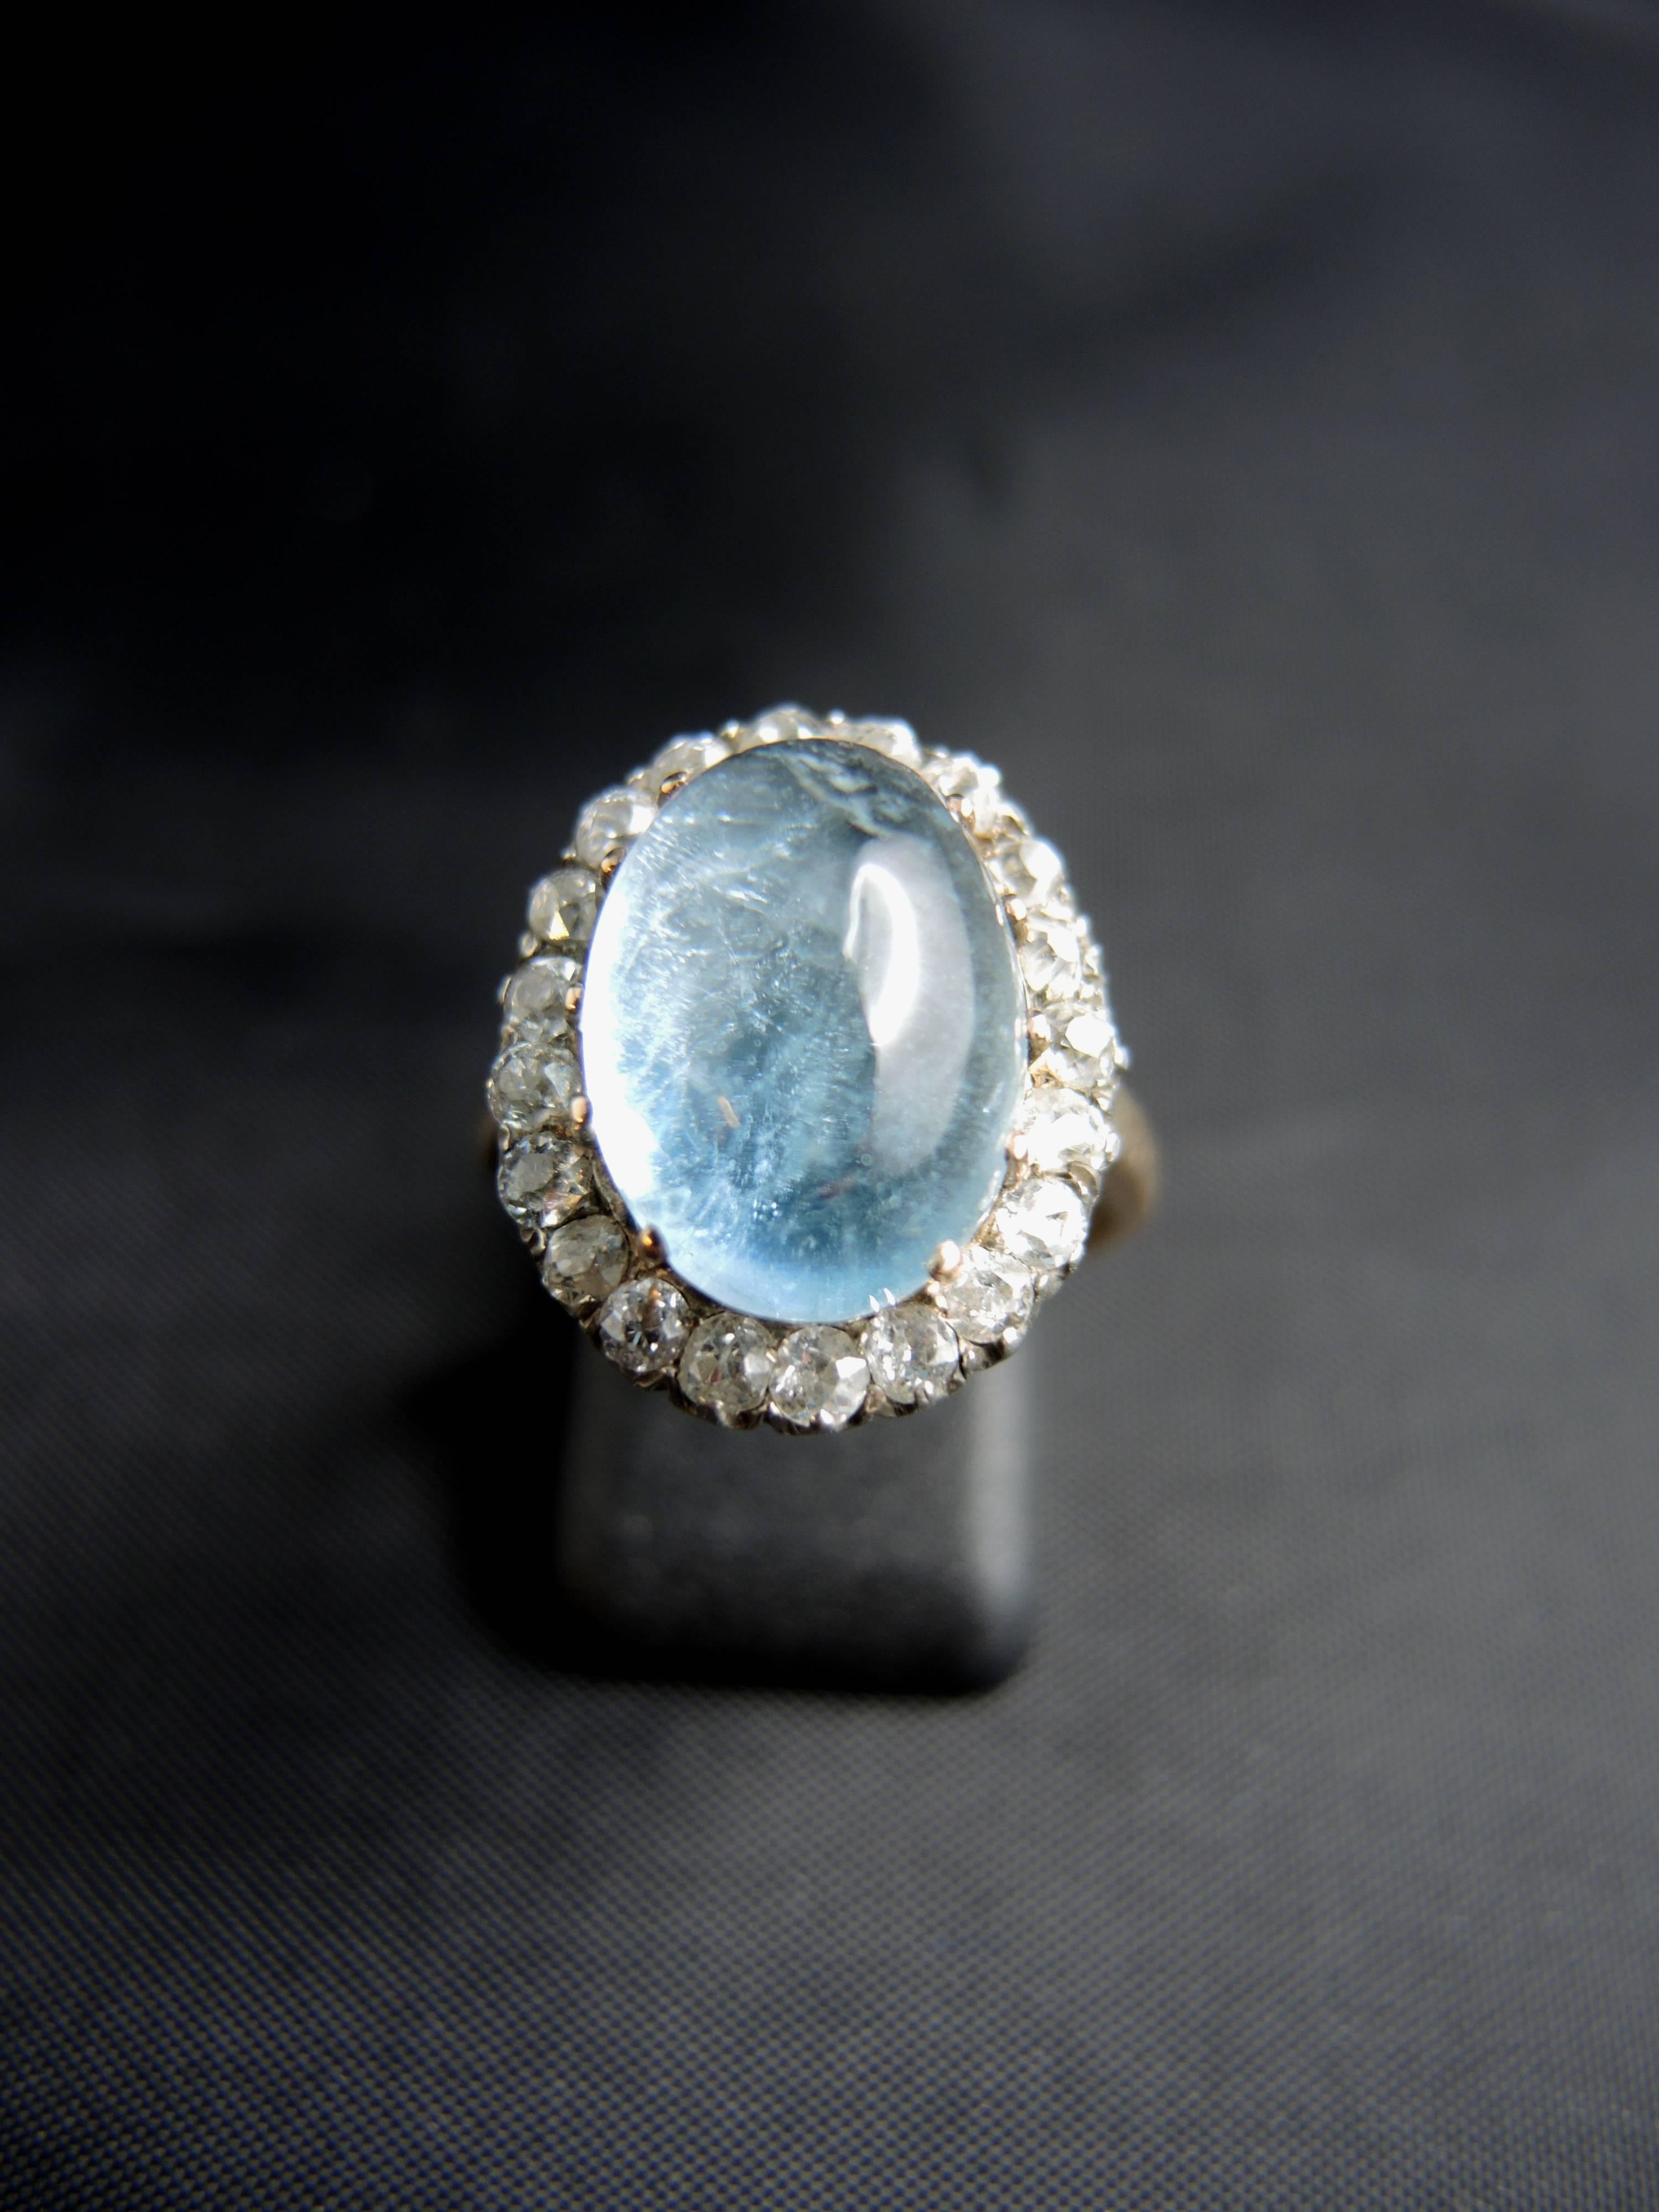 14kt gold and silver cluster ring (quality mark: scallop and swan) set with a superb 12,00 cts cabochon of aquamarine, surrounded with old cut diamonds, total weight estimated around 0,80ct.

Work from the 19th century.

Weight: 4,60g
Ring size: 51